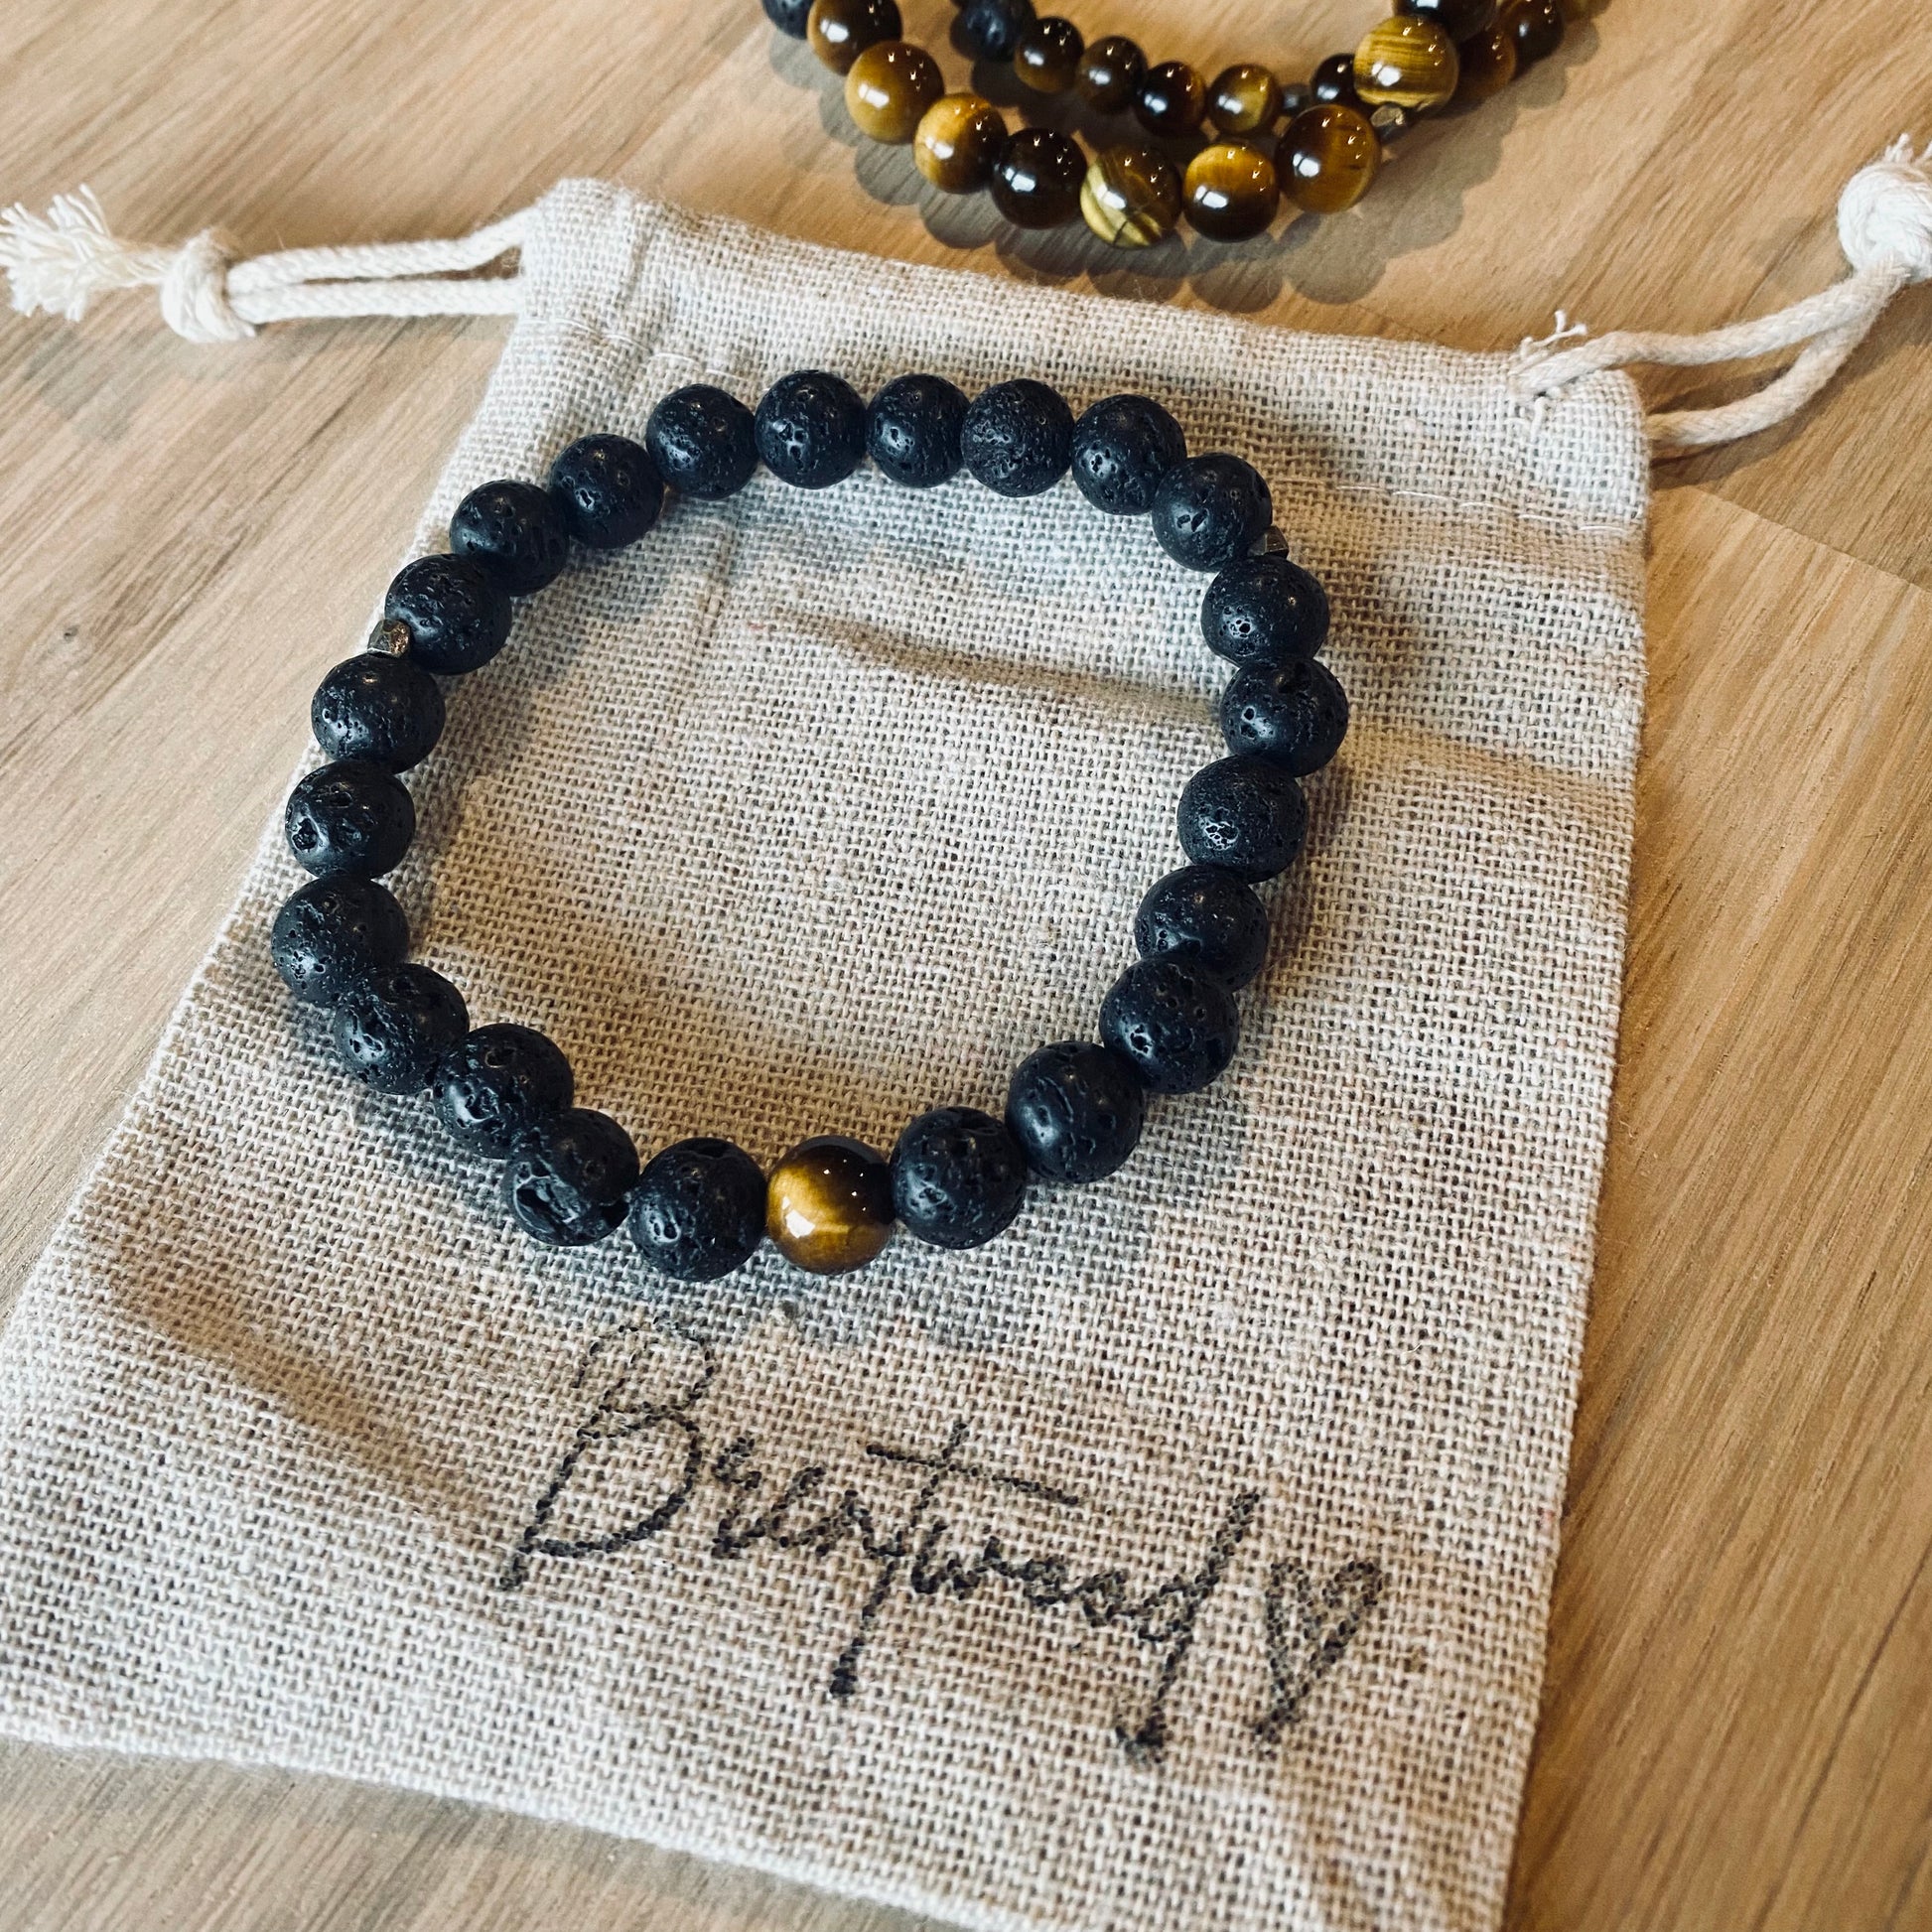 Lava 8 Aroma Bracelet - 8mm beaded diffuser bracelet made from black lava stone & a single tiger eye bead with antiqued gold faceted embellishments. Laid on cloth pouch/drawstring bag stamped with “Brentwood” and a heart.